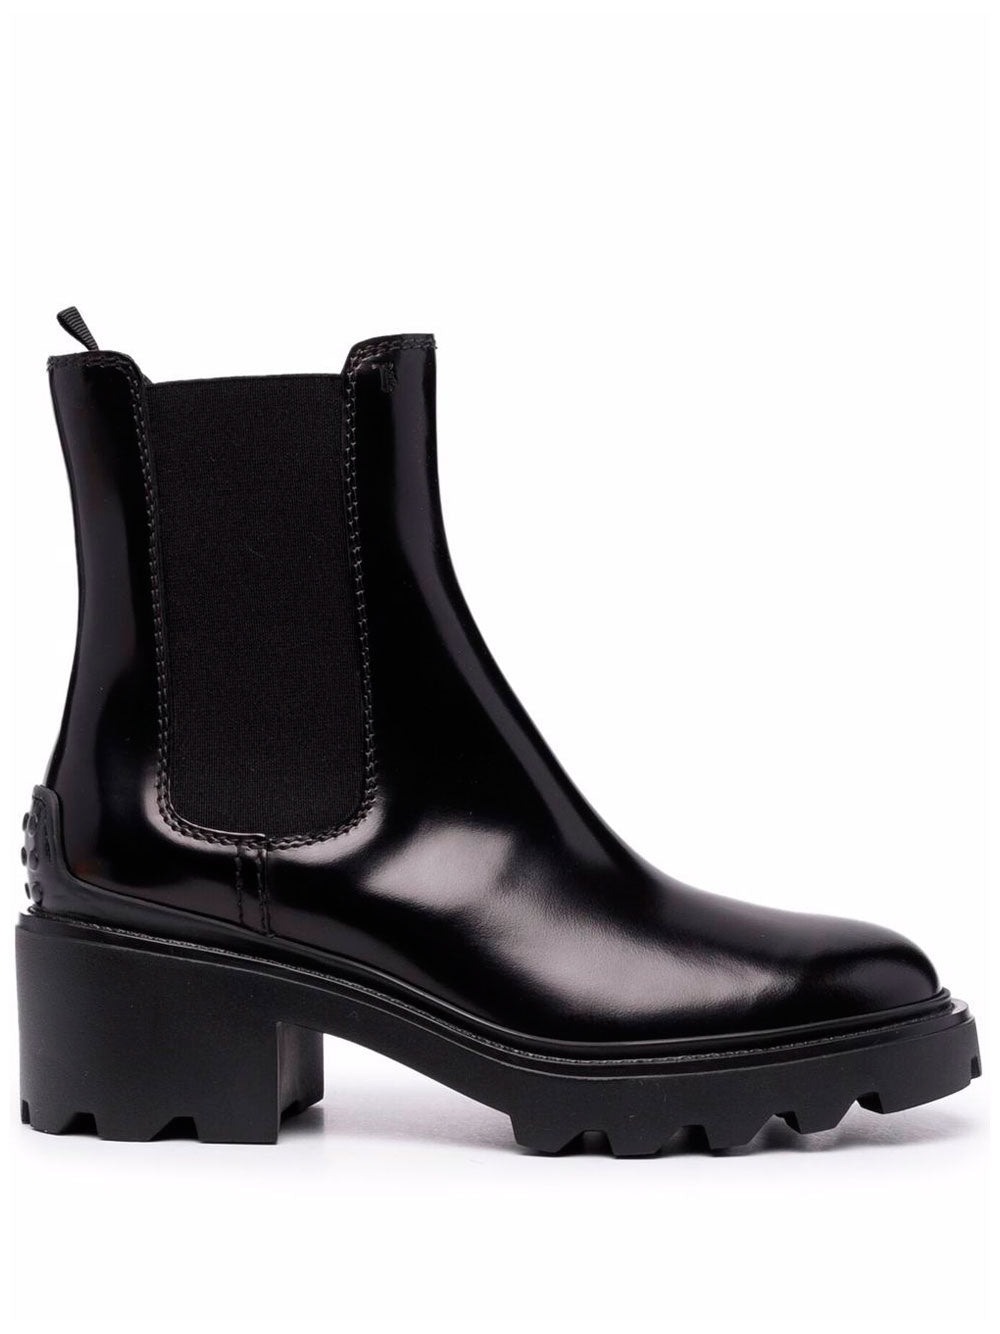 60mm Chelsea boots